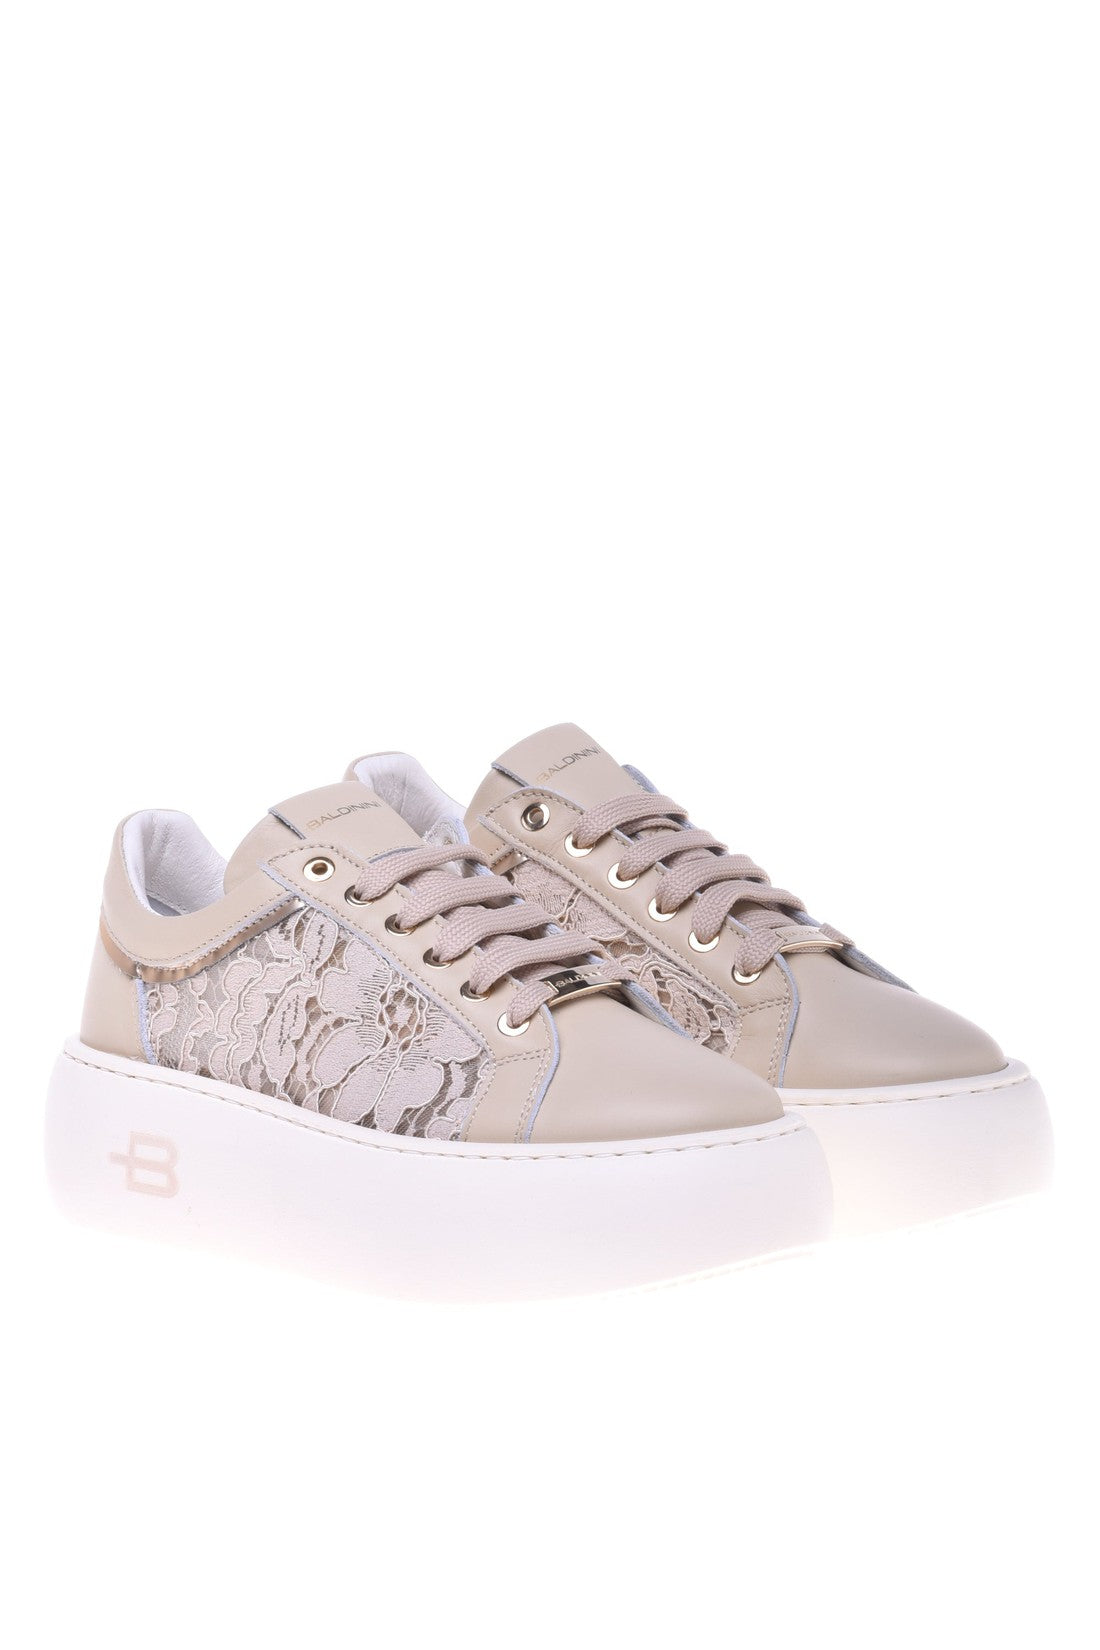 BALDININI-OUTLET-SALE-Sneaker-in-beige-nappa-leather-and-lace-Sneaker-ARCHIVE-COLLECTION-3.jpg